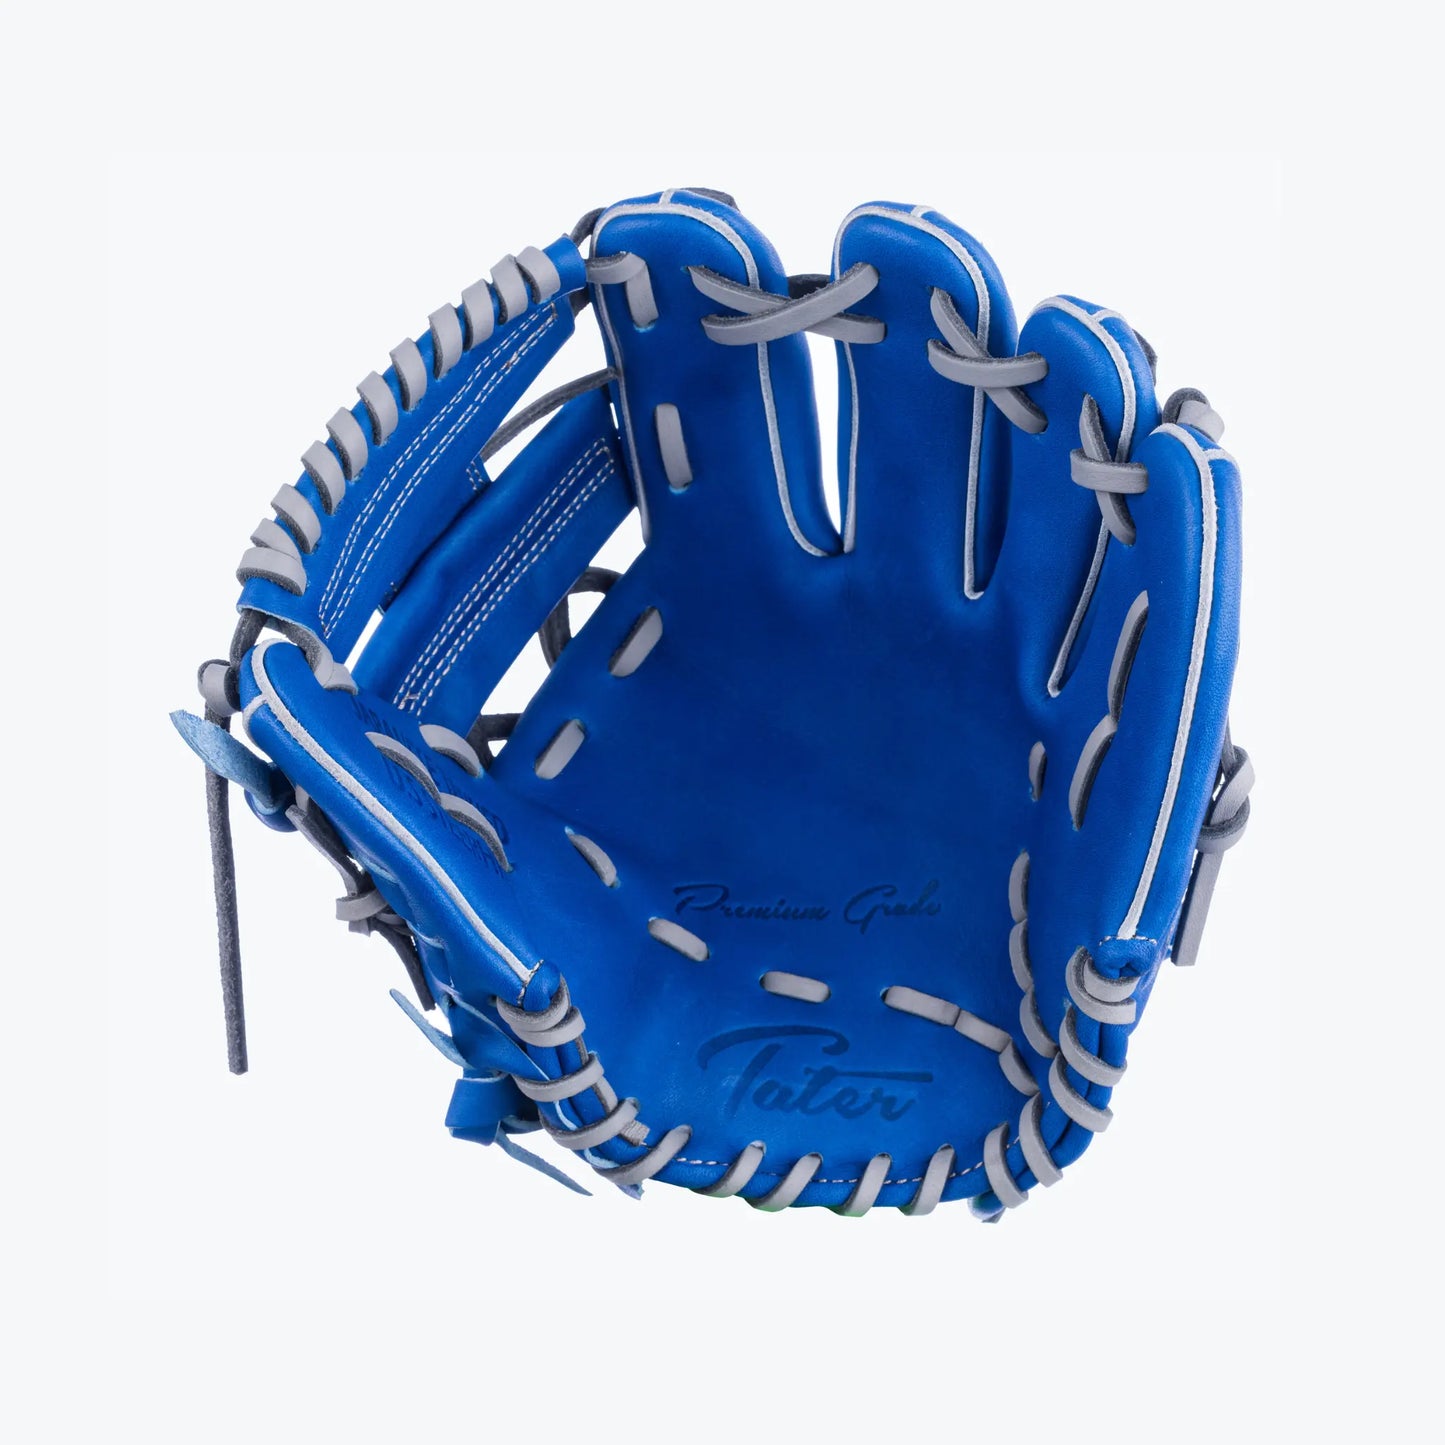 Premium royal blue infield baseball glove by Tater Baseball, 9.5-inch size, featuring durable grey lacing and deep pocket design for enhanced ball control and secure catch, side inside view highlighting the 'Tater' and 'Premium Grade' embossed logos.